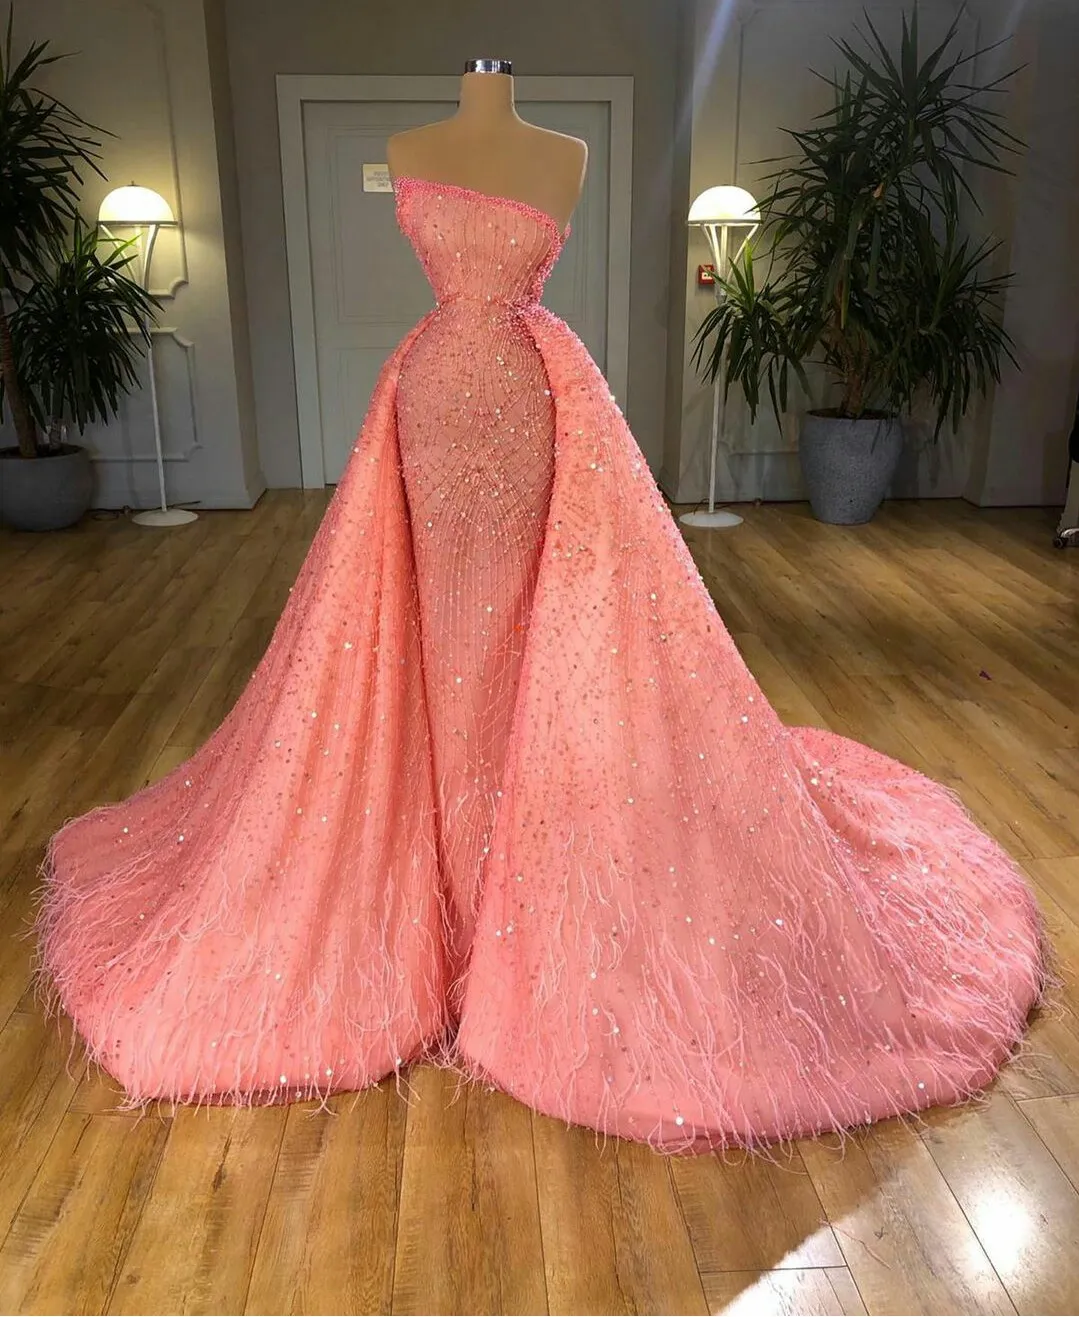 Luxury One Shoulder Evening Dresses Lace Beads Sequins Feather Overskirt Prom Dress Custom Made Mermaid Formal Party Gowns